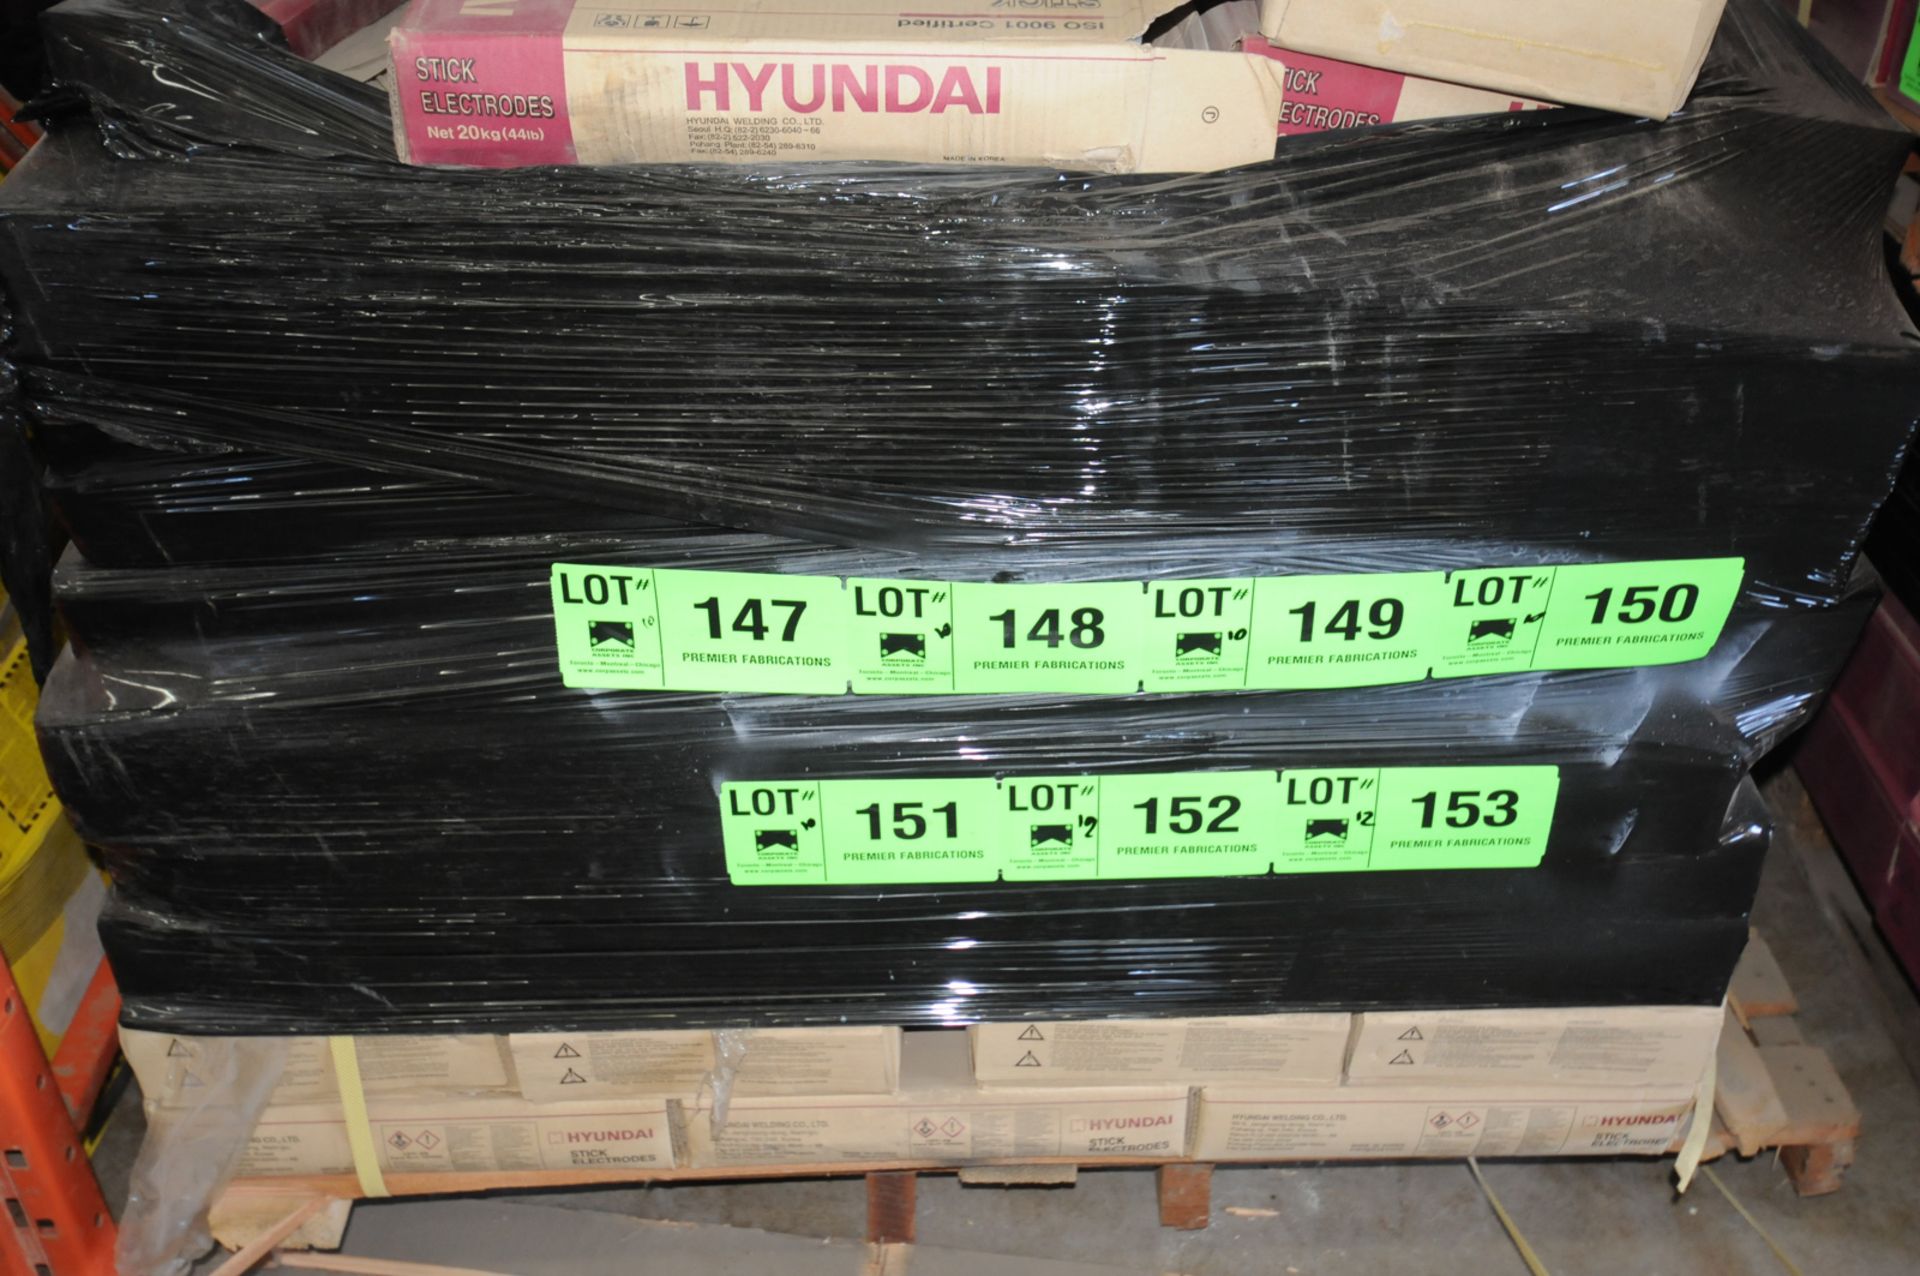 LOT/ (10) 44LB SPOOLS OF HYUNDAI S-7018.GH STICK ELECTRODES CONFORMING TO AWS A5.1/ASME SFA 5.1 - Image 2 of 2